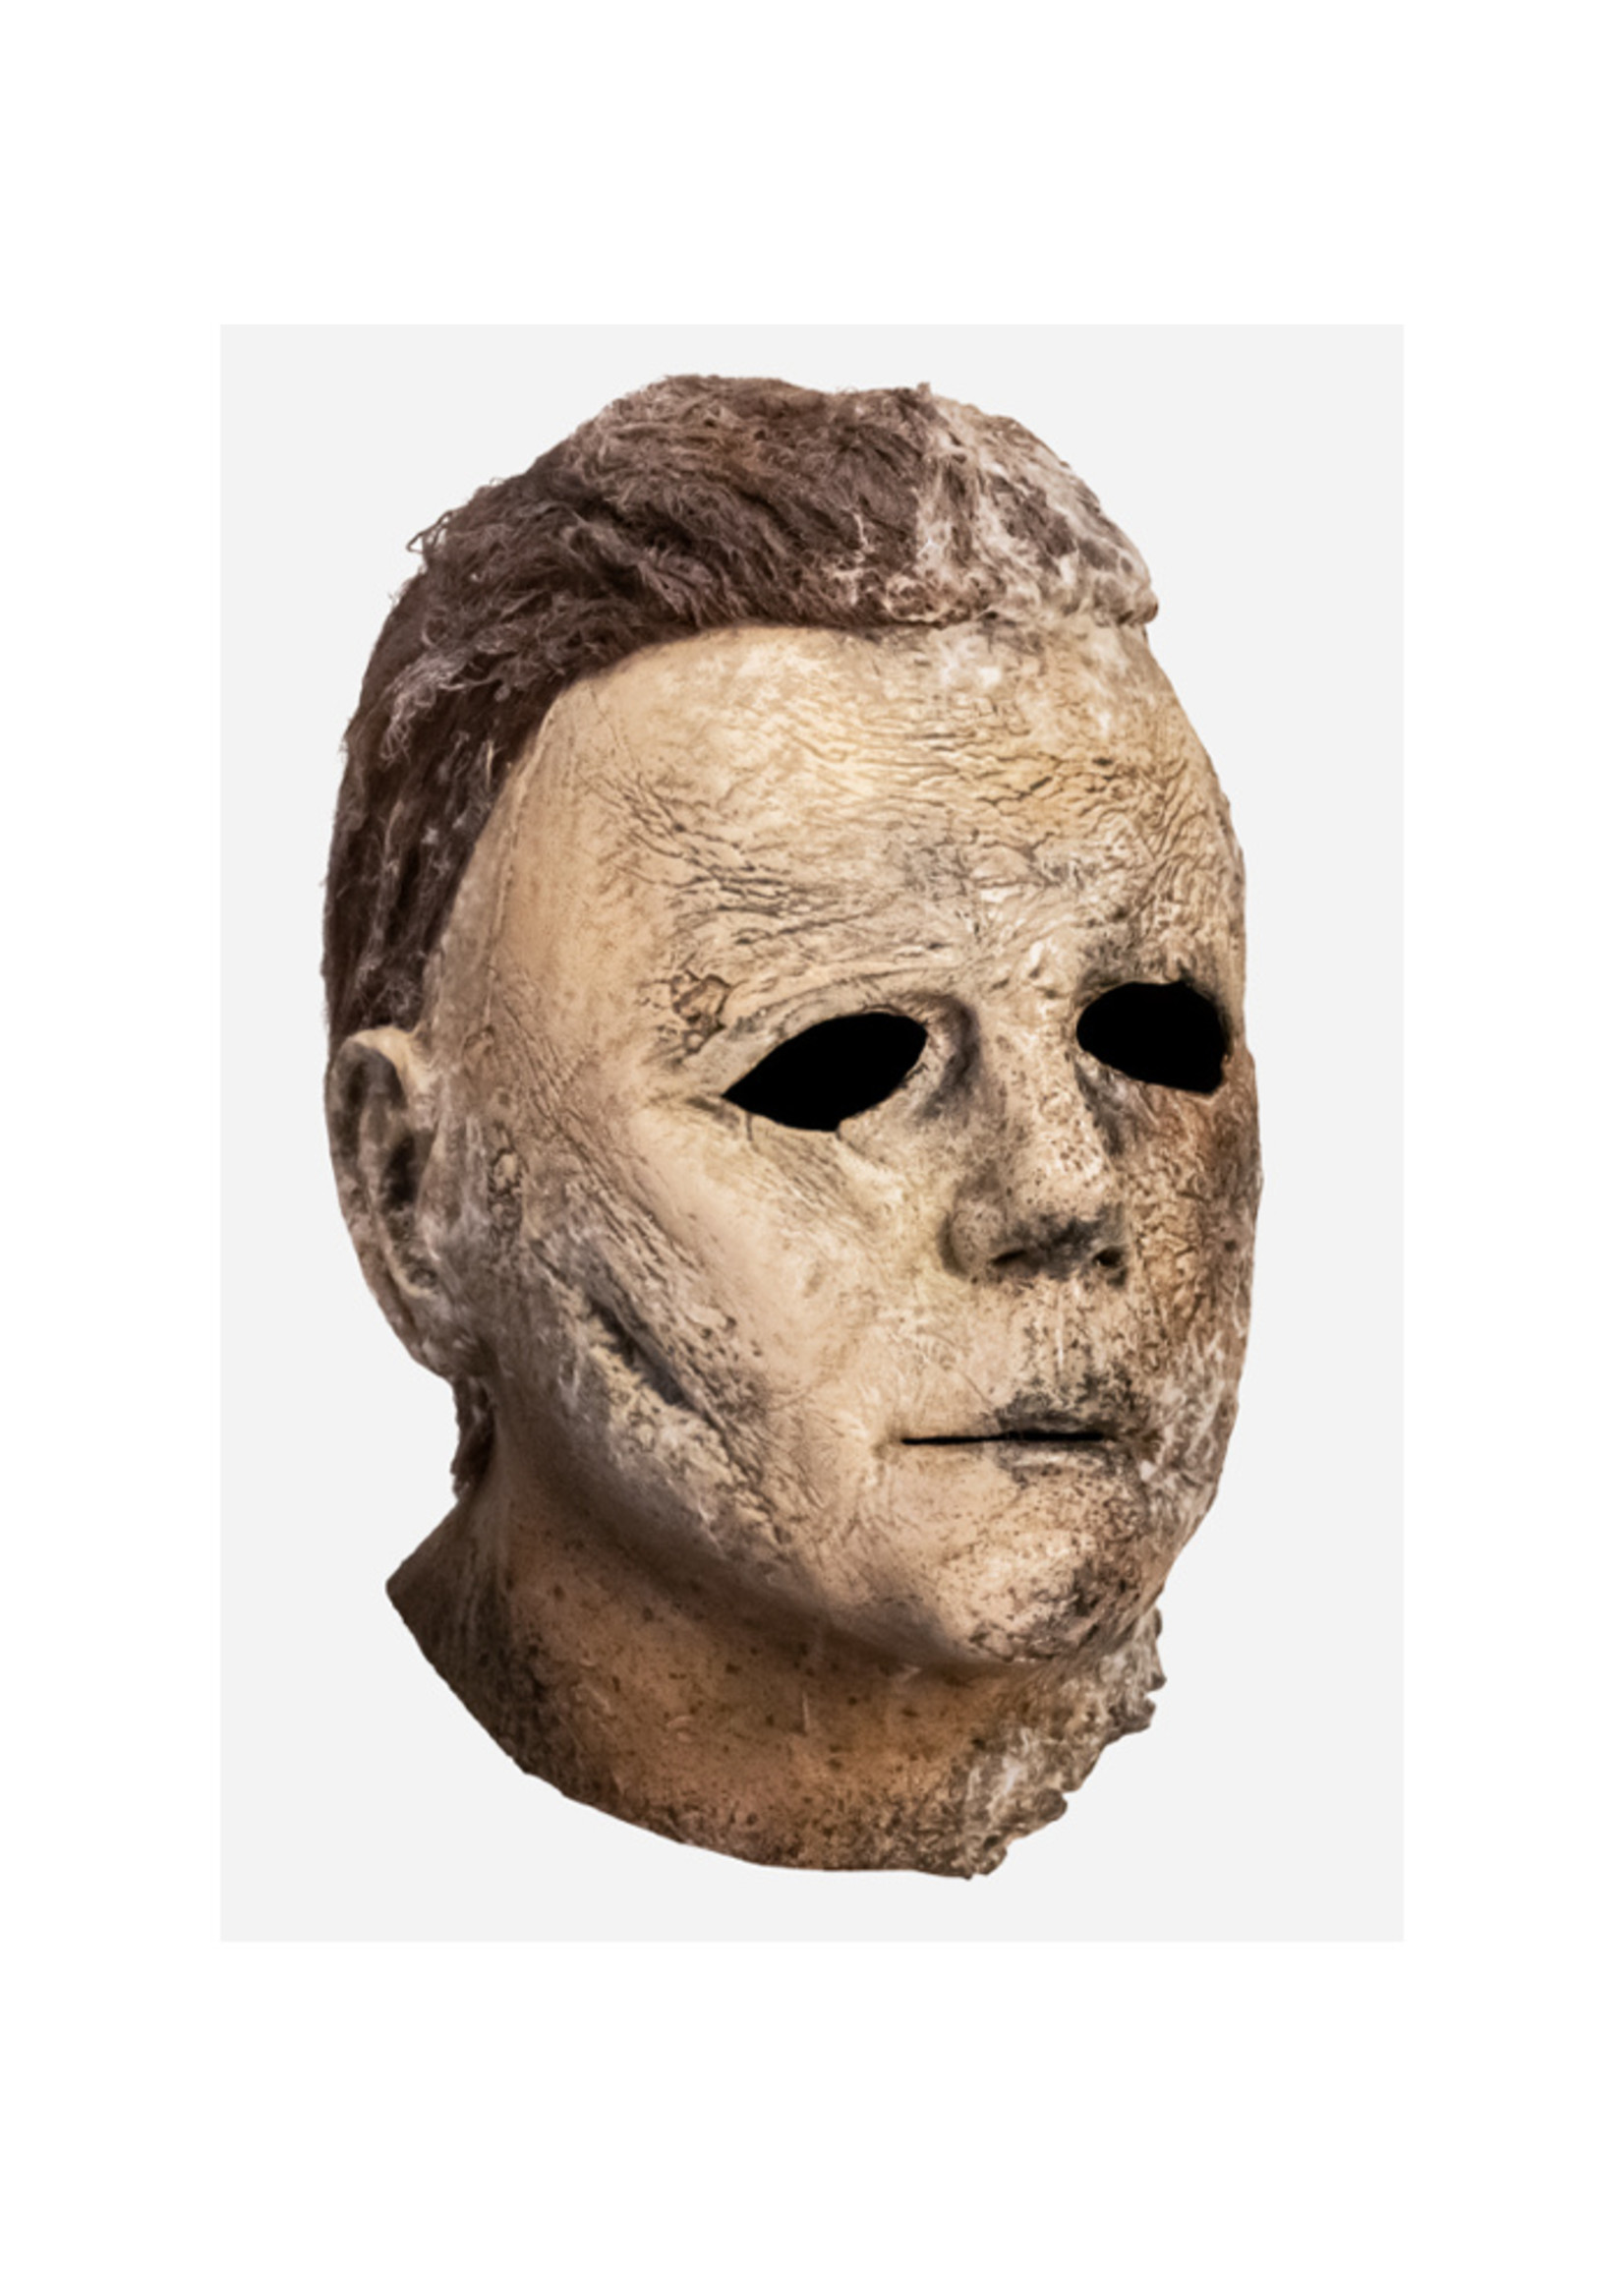 TRICK OR TREAT HALLOWEEN ENDS - MICHAEL MYERS MASK